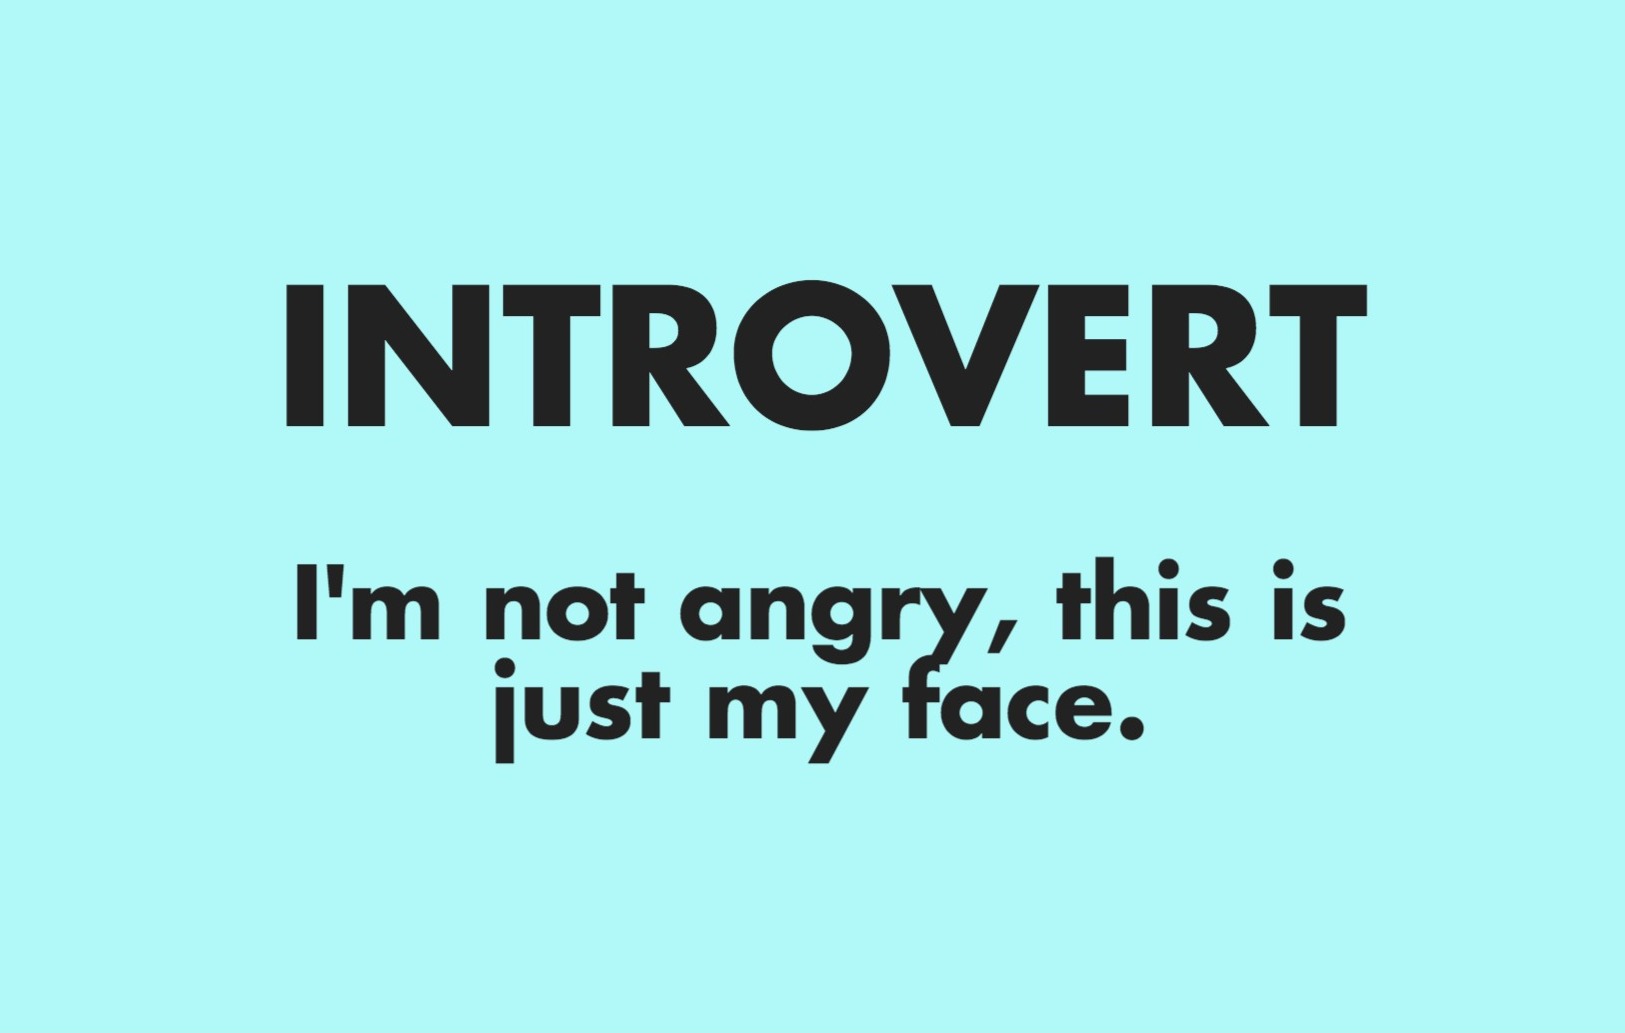 Introvert: I’m Not Angry, This Is Just My Face